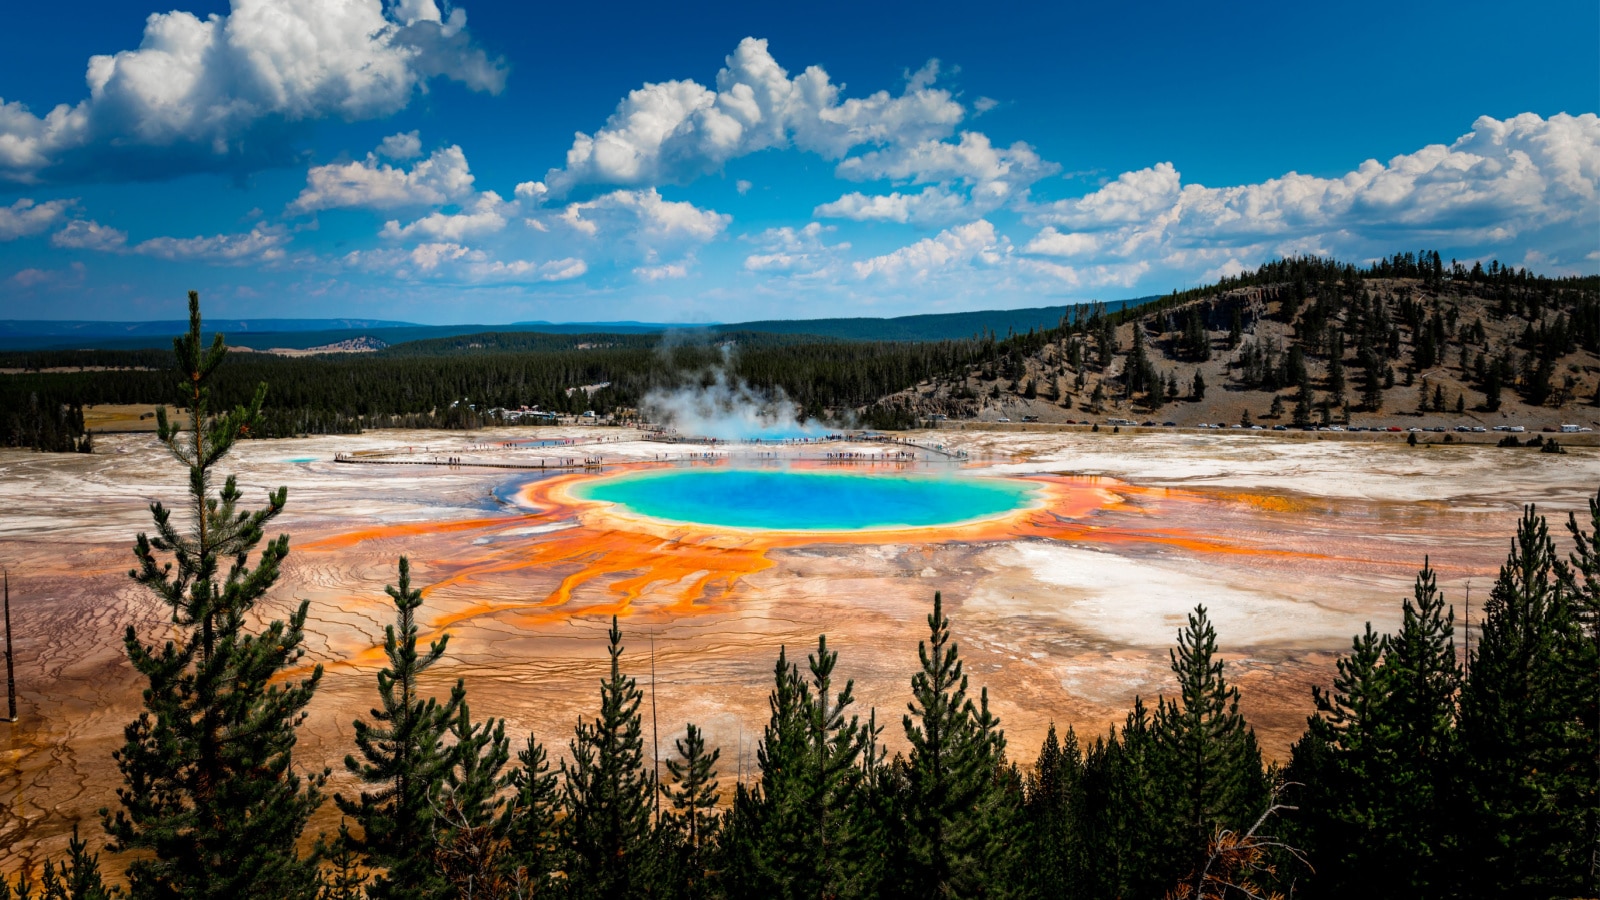 <p>The first national park in the world, Yellowstone is known for its geothermal features, including geysers like Old Faithful, as well as wildlife such as bison, elk, and wolves, all set against a backdrop of stunning landscapes.</p>